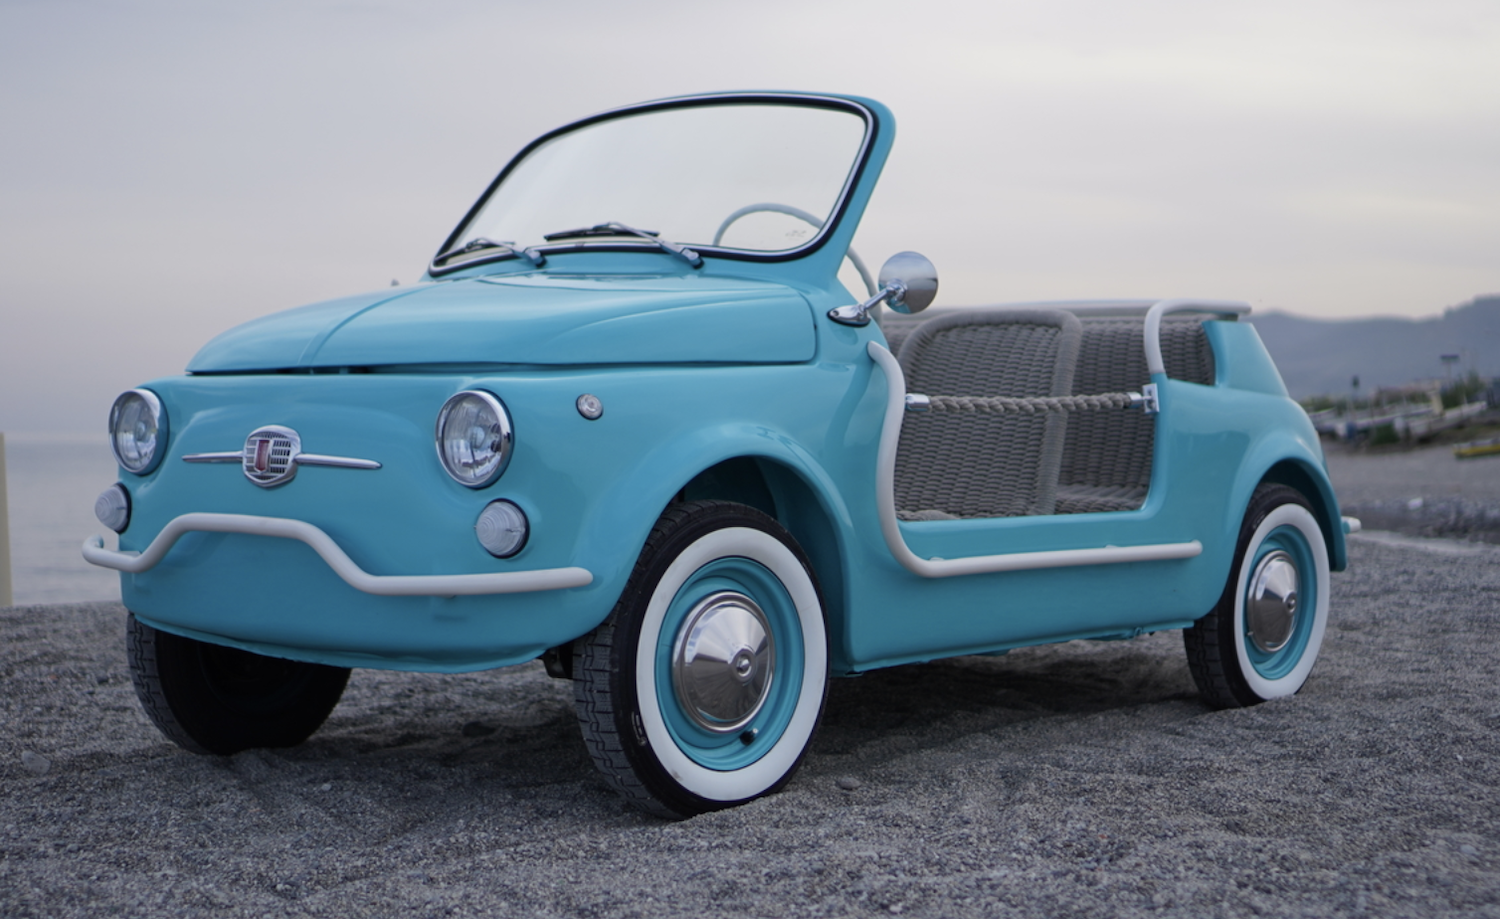 The Vintage Fiat Jolly Gets An Electric Makeover - The Icon-e